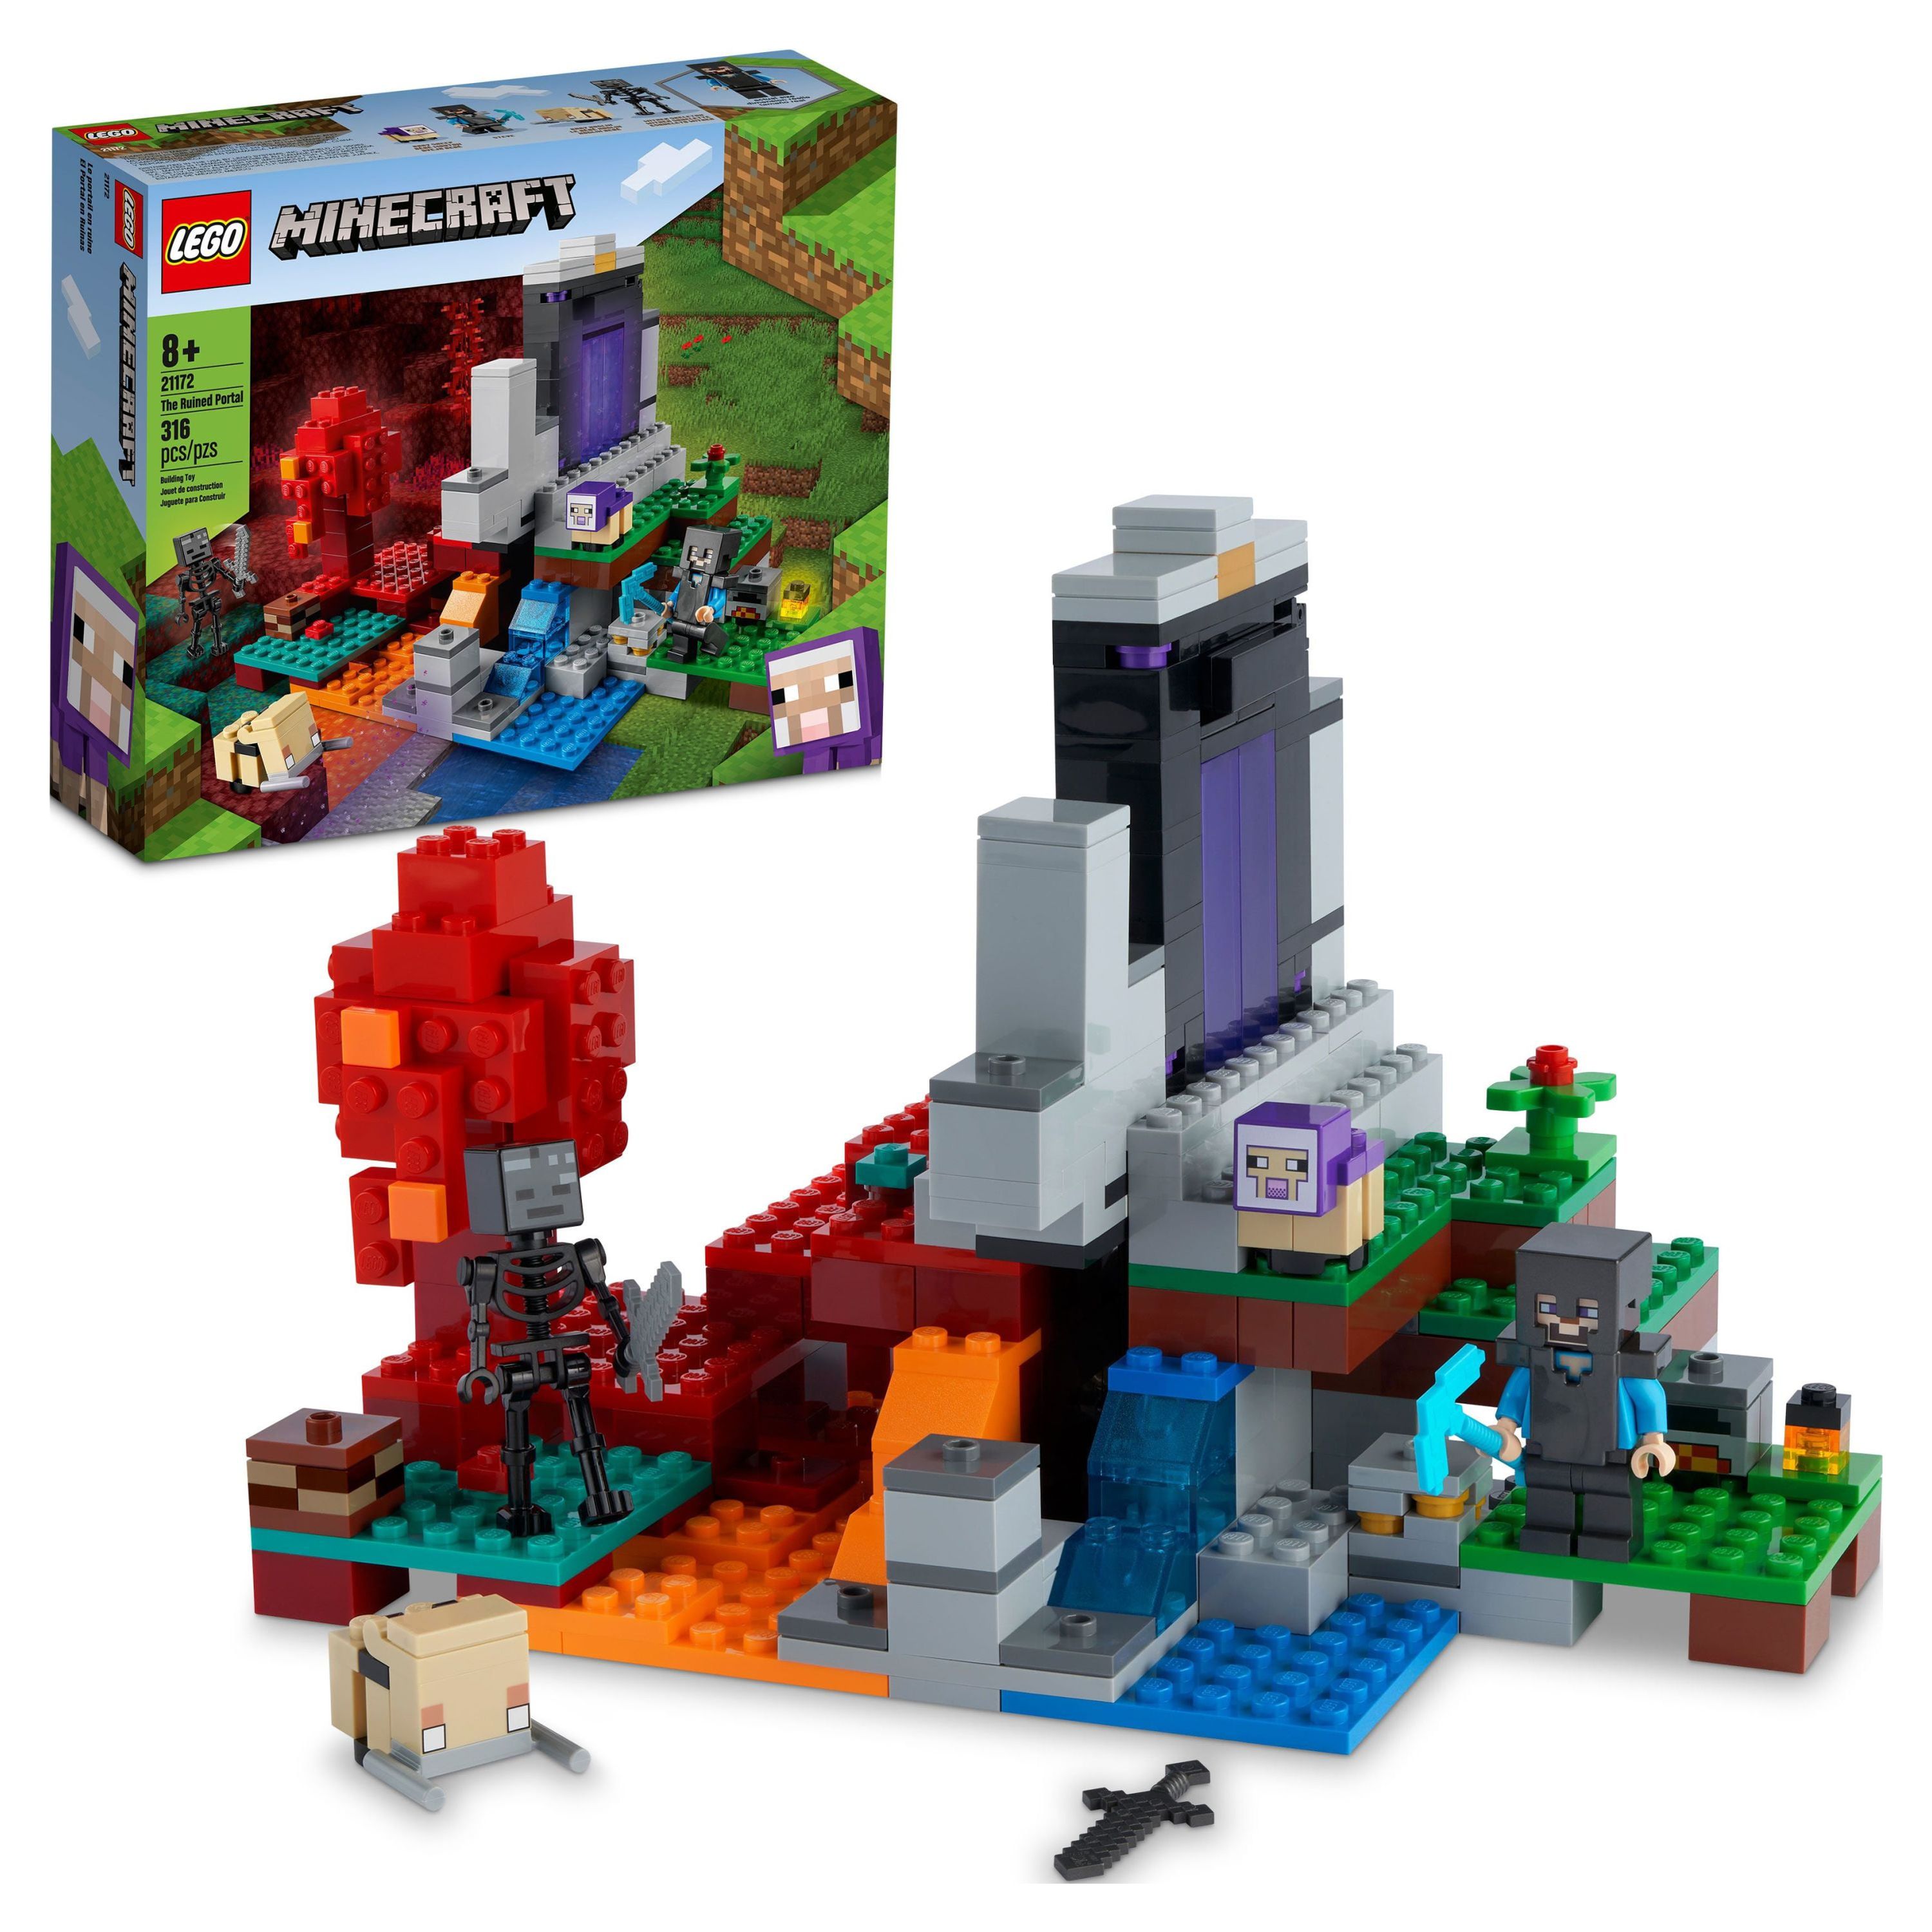 LEGO Minecraft The Ruined Portal Building Toy 21172 with Steve and Wither Skeleton Figures, Gift Idea for 8 Plus Year Old Kids, Boys & Girls - image 1 of 8